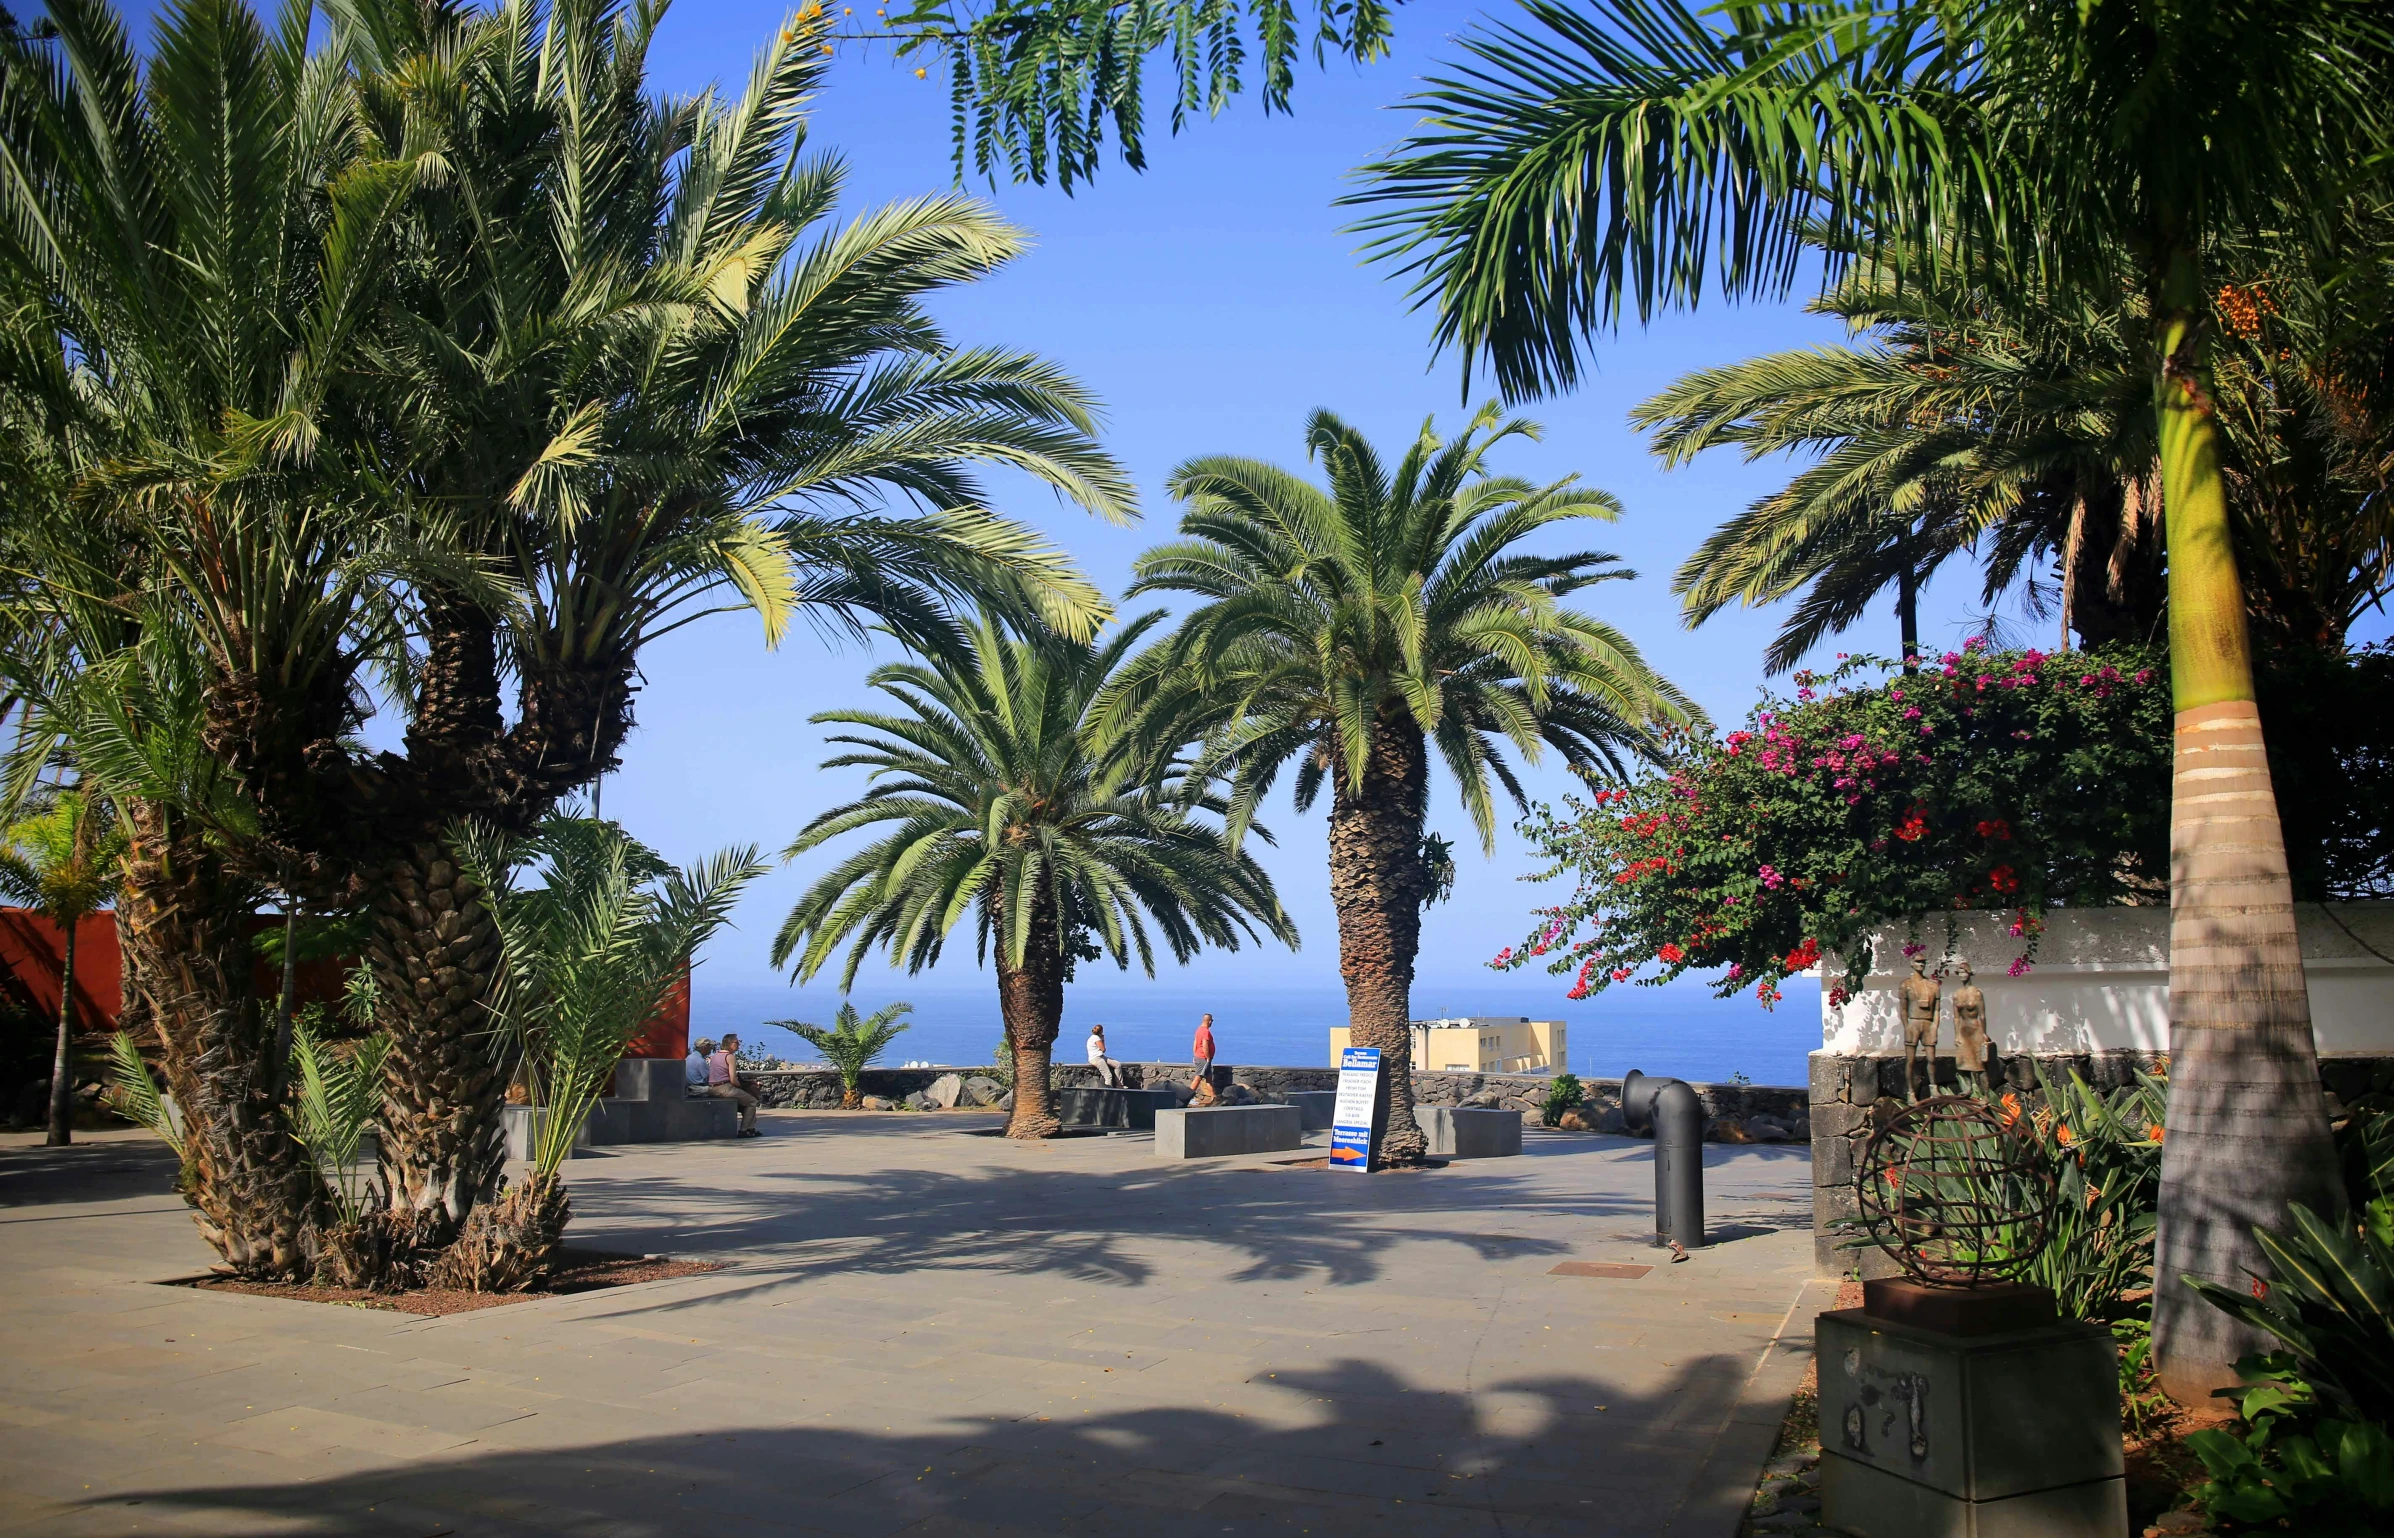 a street lined with palm trees next to the ocean, garden with fruits on trees, square, victoria siemer, no cropping